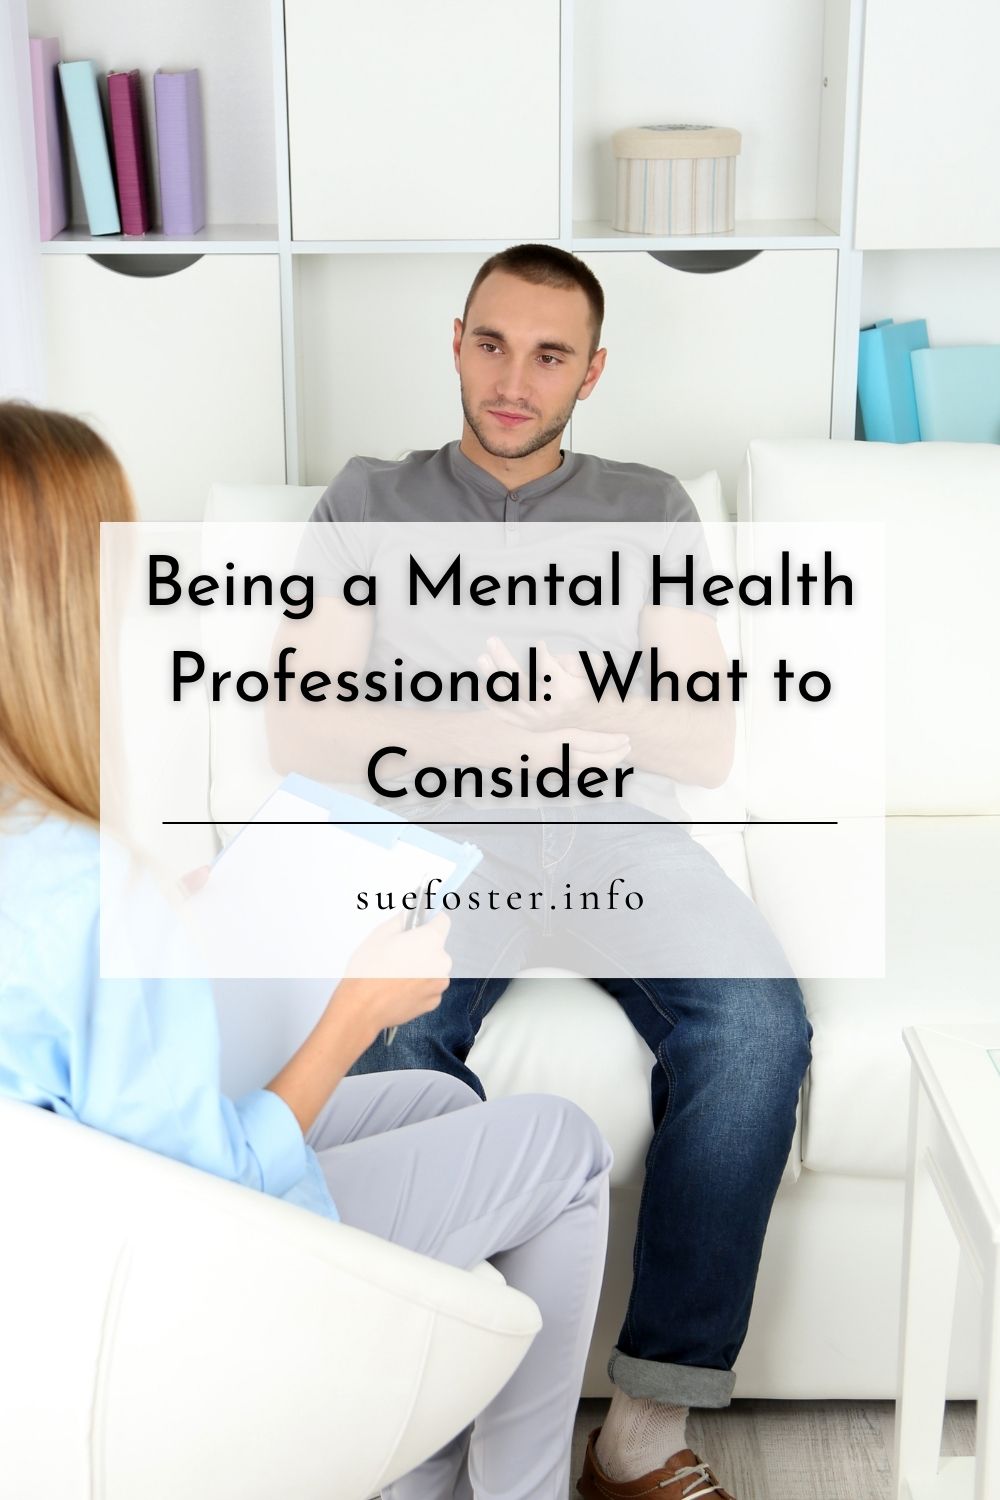 A mental health career will require proper preparations to get. Here are a few steps to take for the career path.